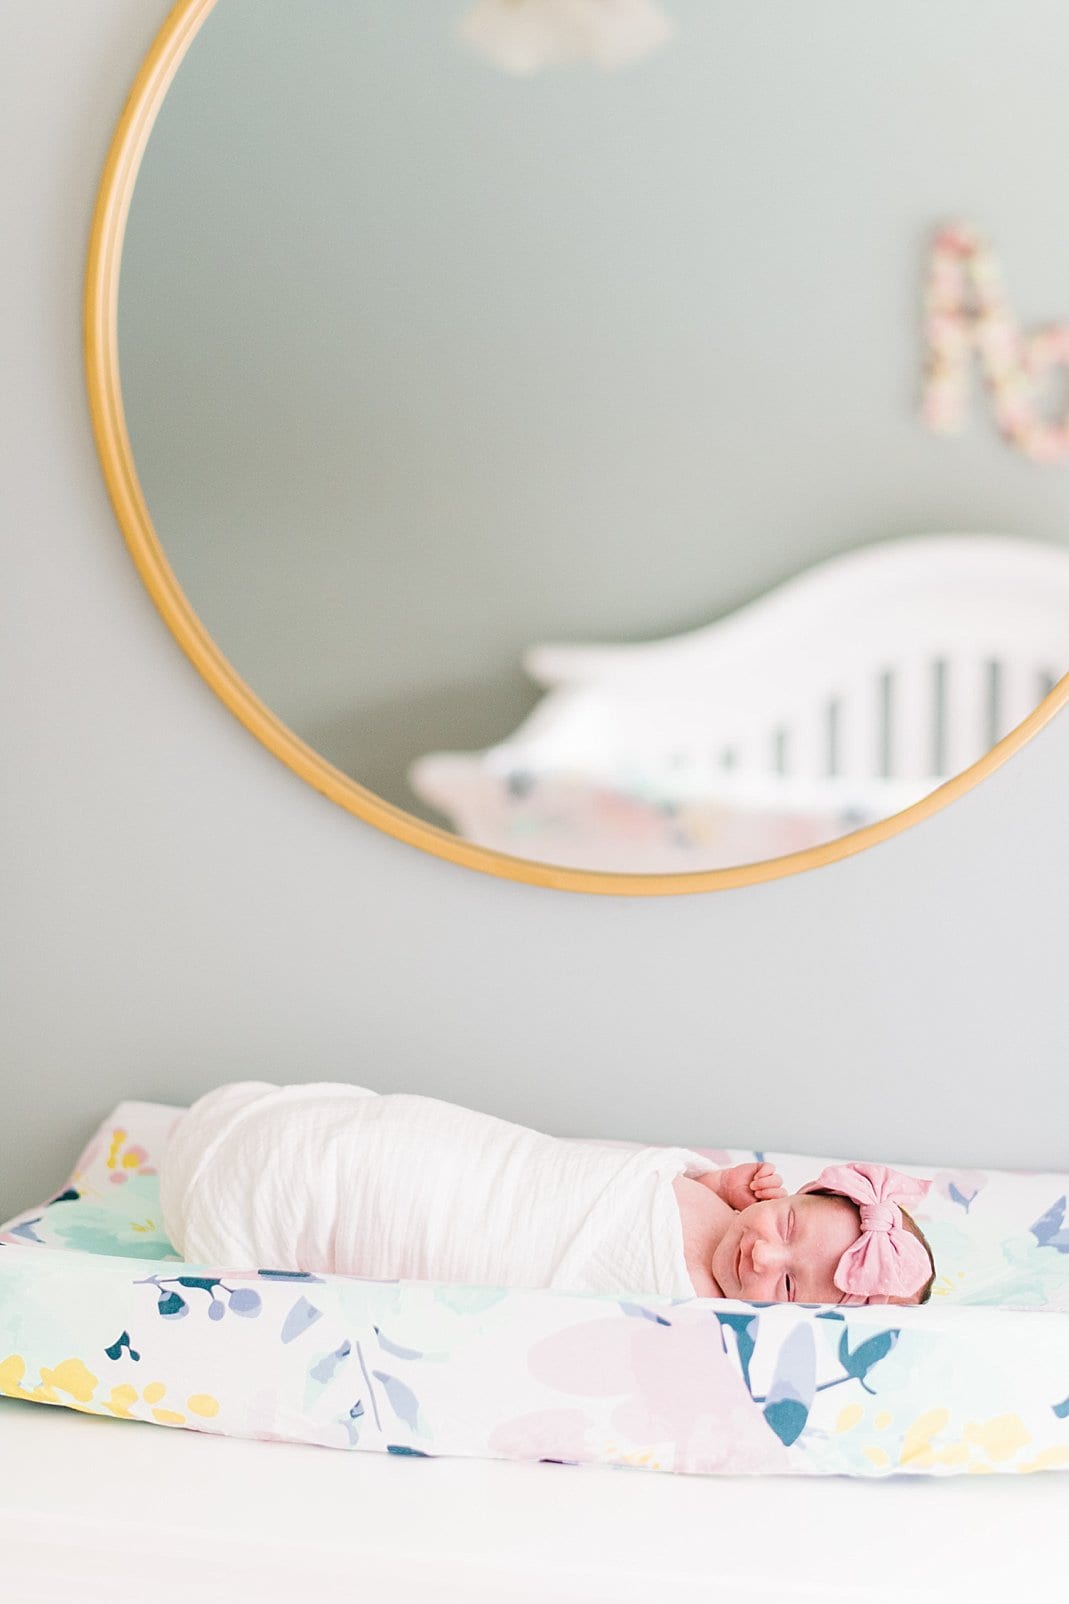 raleigh newborn laying on changing table under gold circle mirror photo